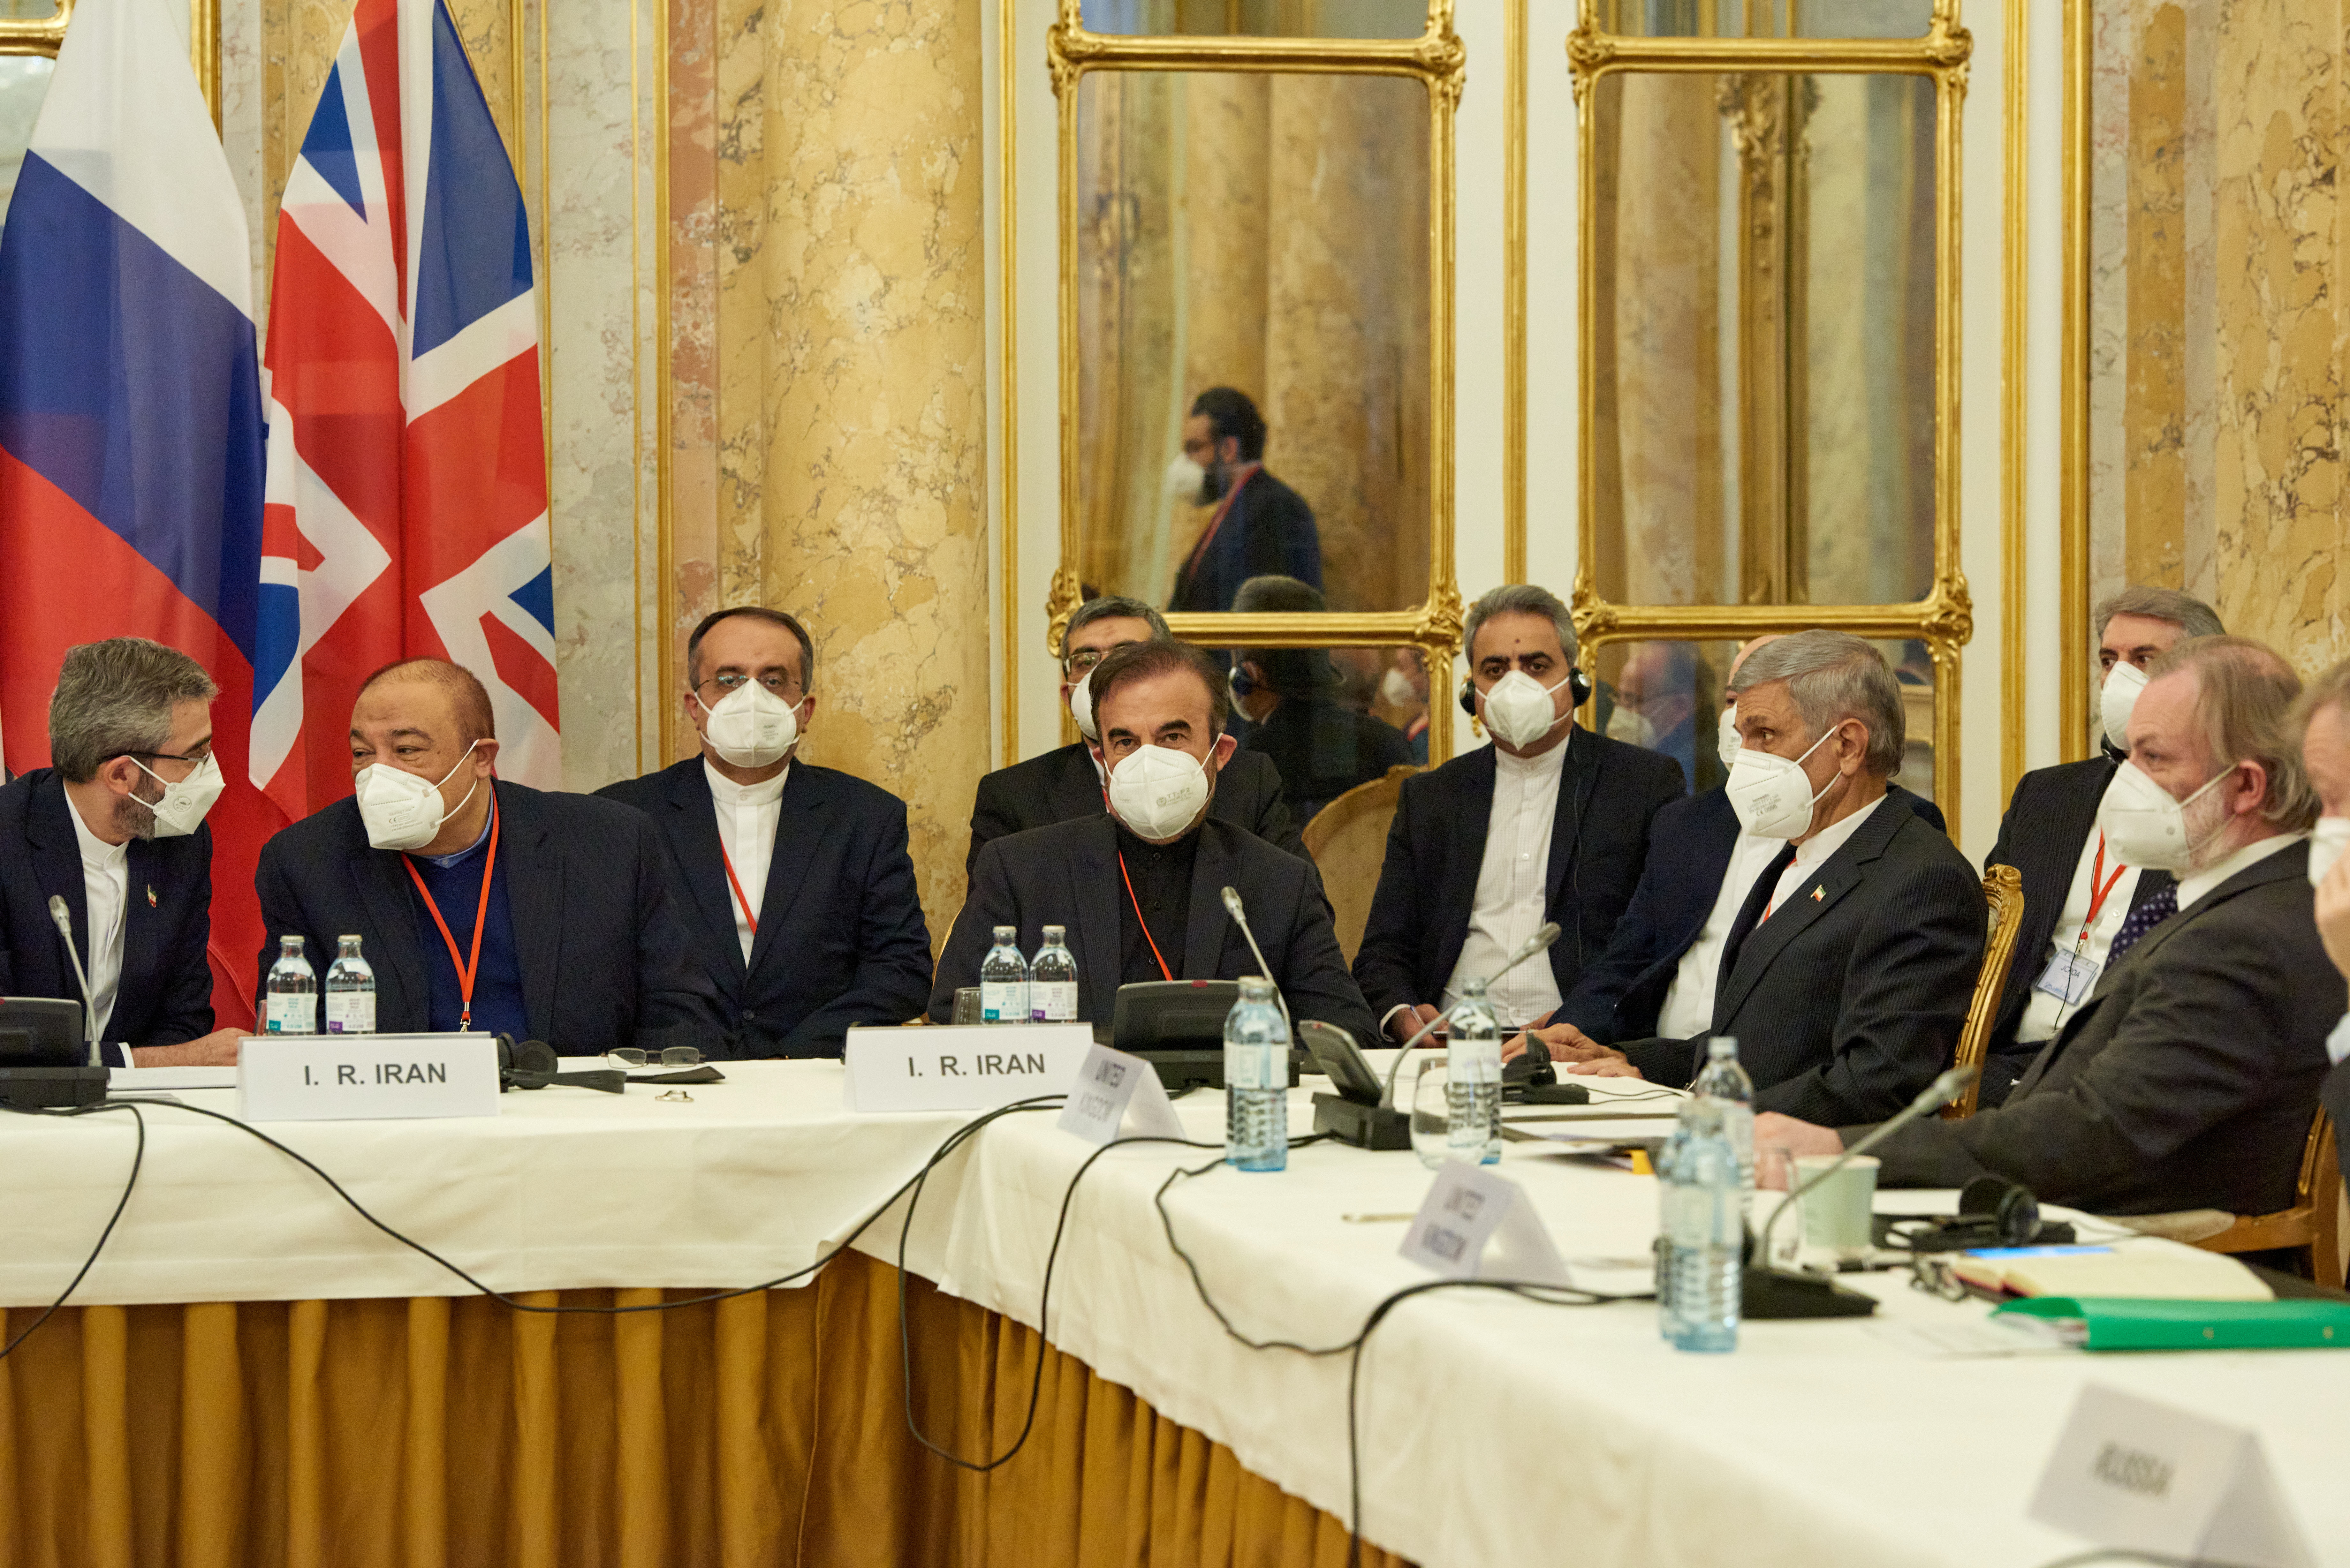 Iran's chief nuclear negotiator Ali Bagheri Kani and members of the Iranian delegation wait for the start of a meeting of the JCPOA Joint Commission in Vienna, Austria November 29, 2021. EU Delegation in Vienna/Handout via REUTERS 